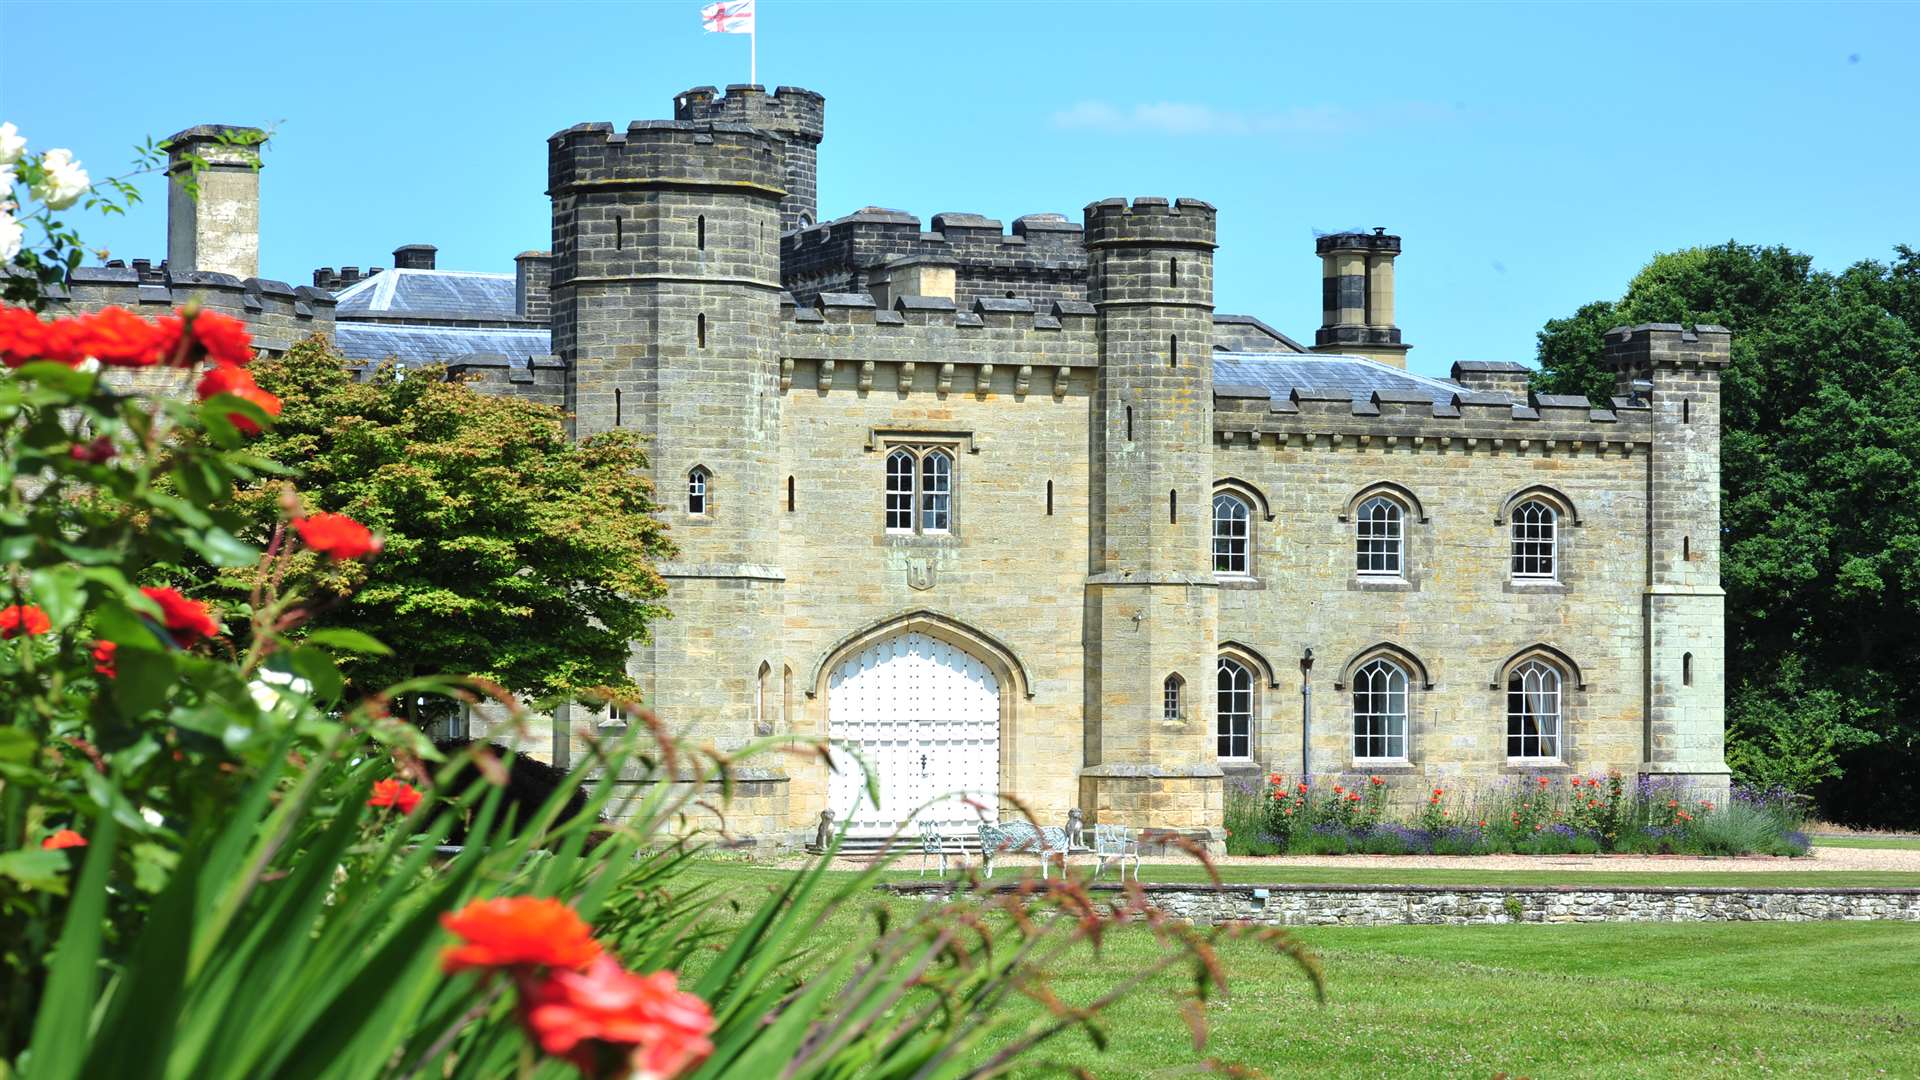 Chiddingstone Castle, near Tonbridge, is not owned by the National Trust